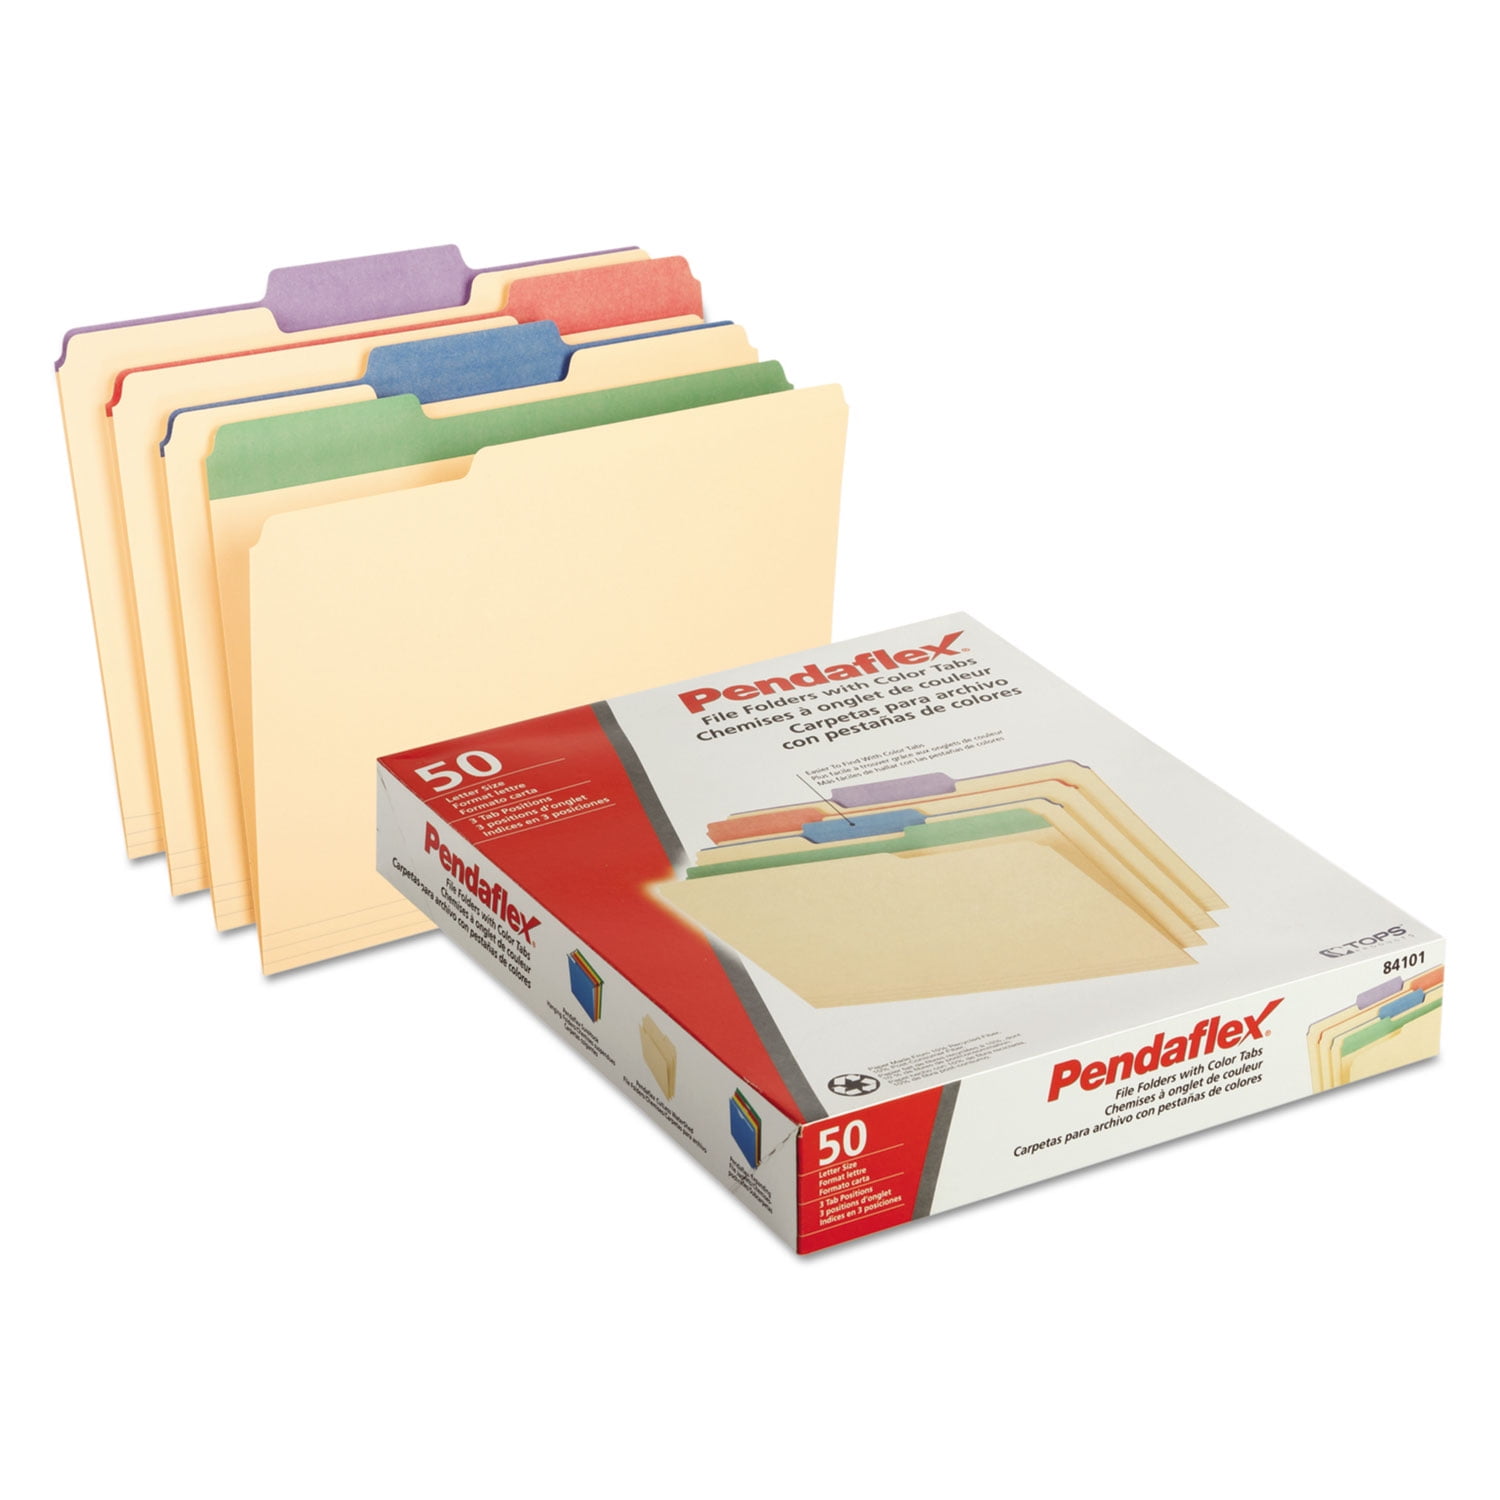 9 x 12 1 Piece Report Covers Folders - Manilla Smooth 150#- 50 Pack